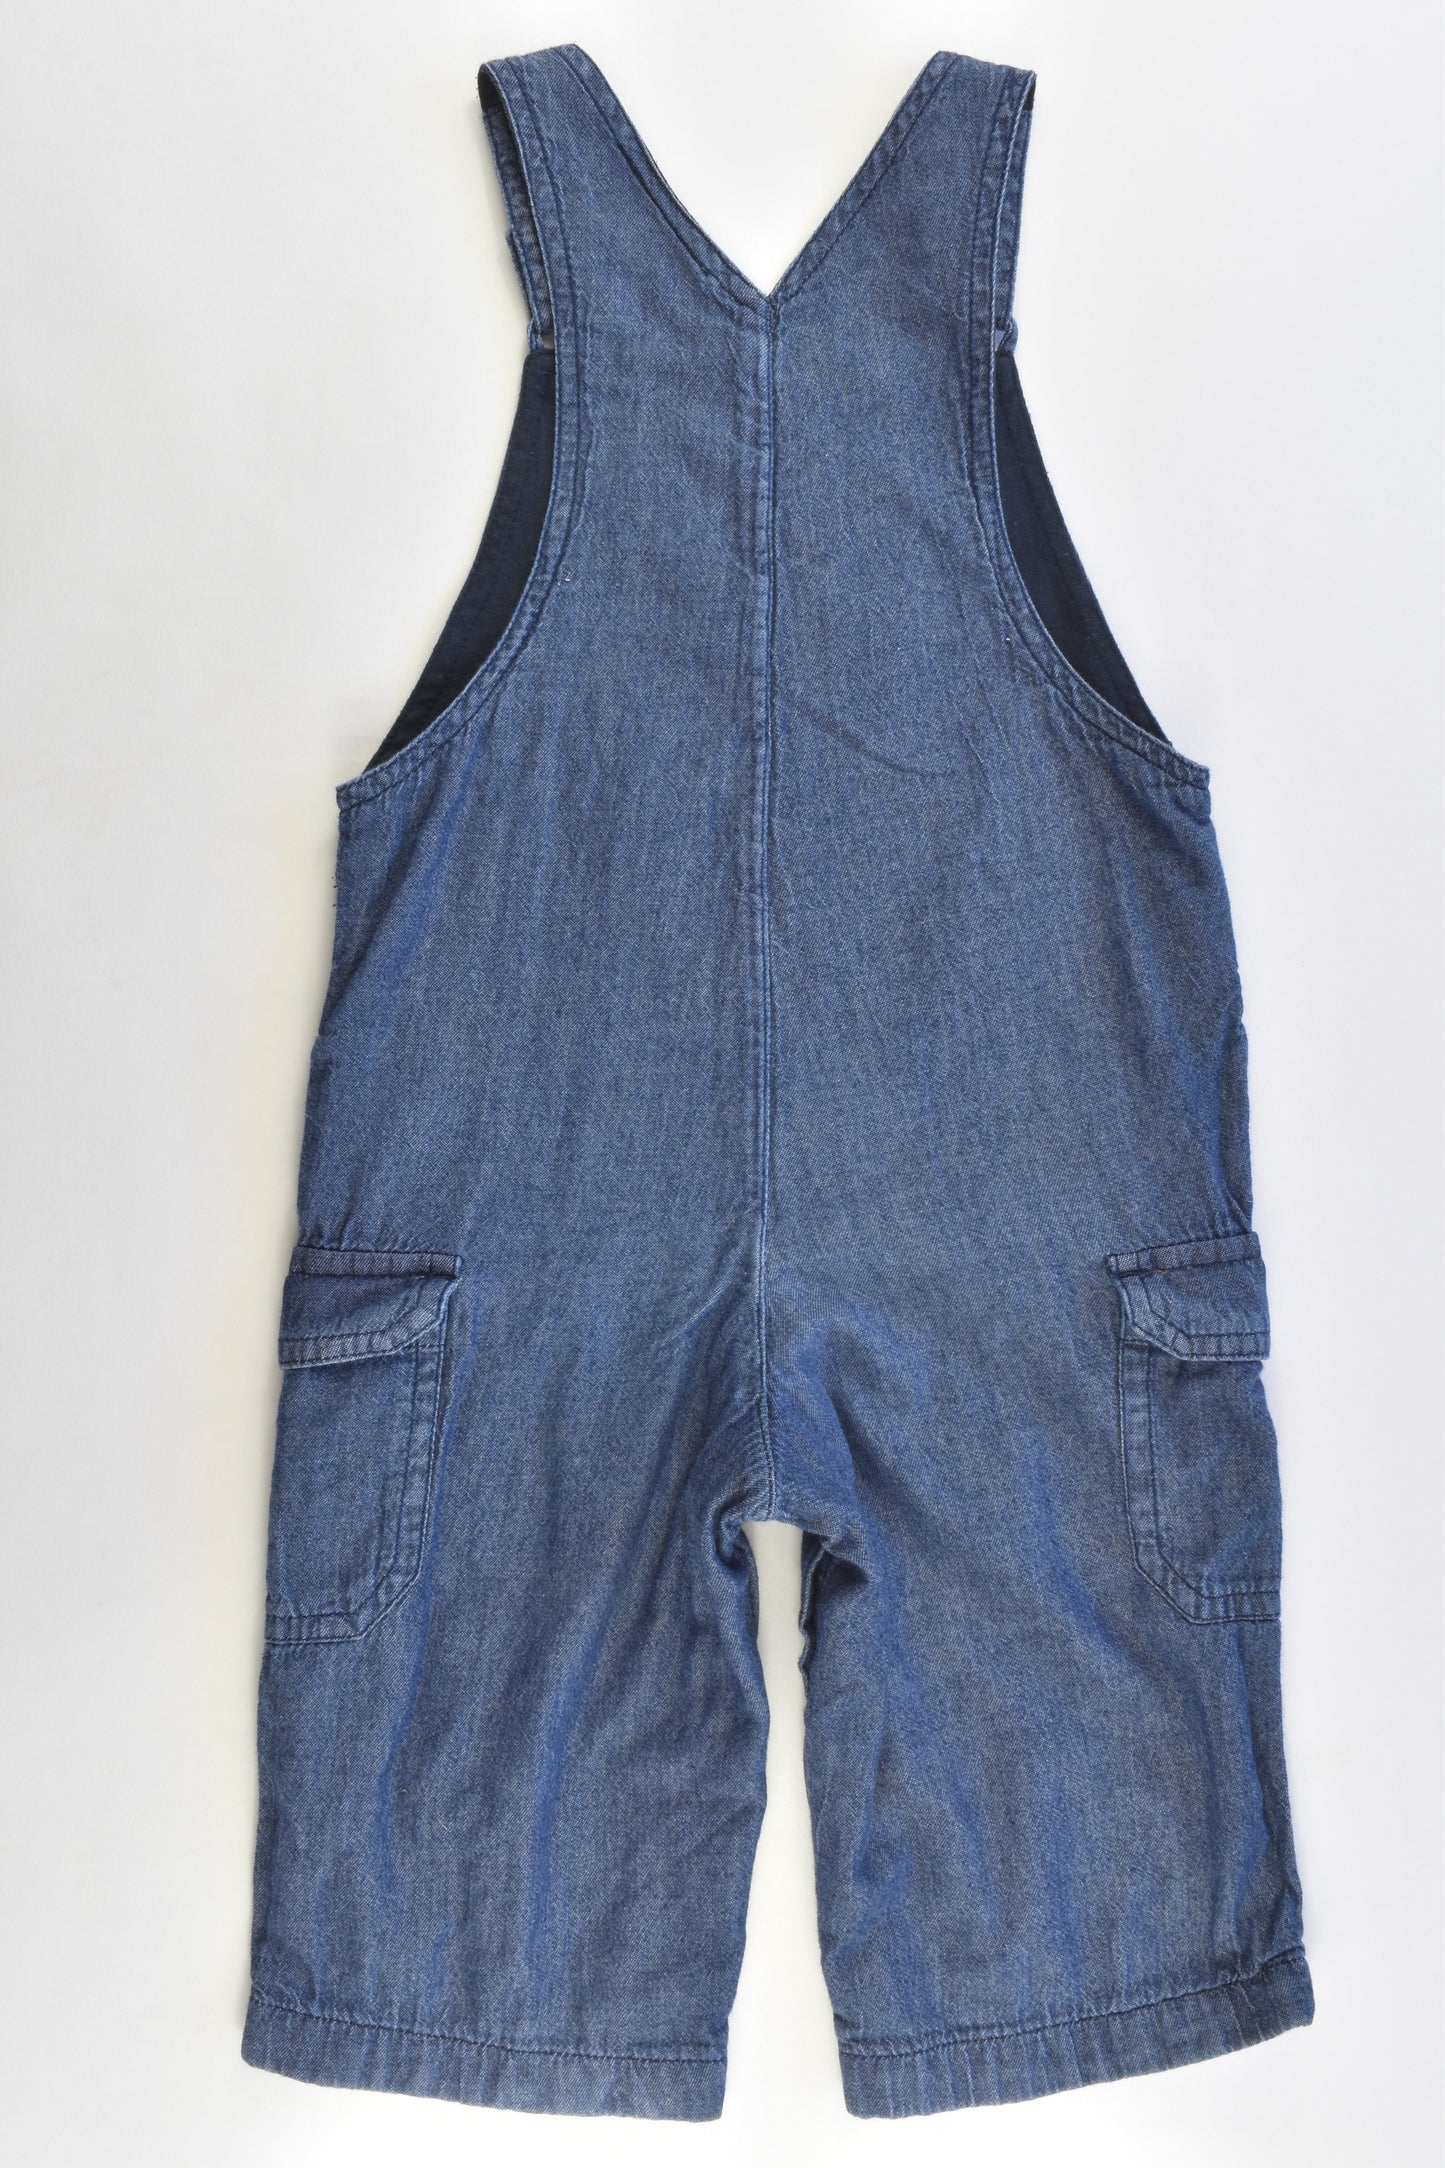 The Little White Company London Size 9-12 months Soft Lined Denim Overalls